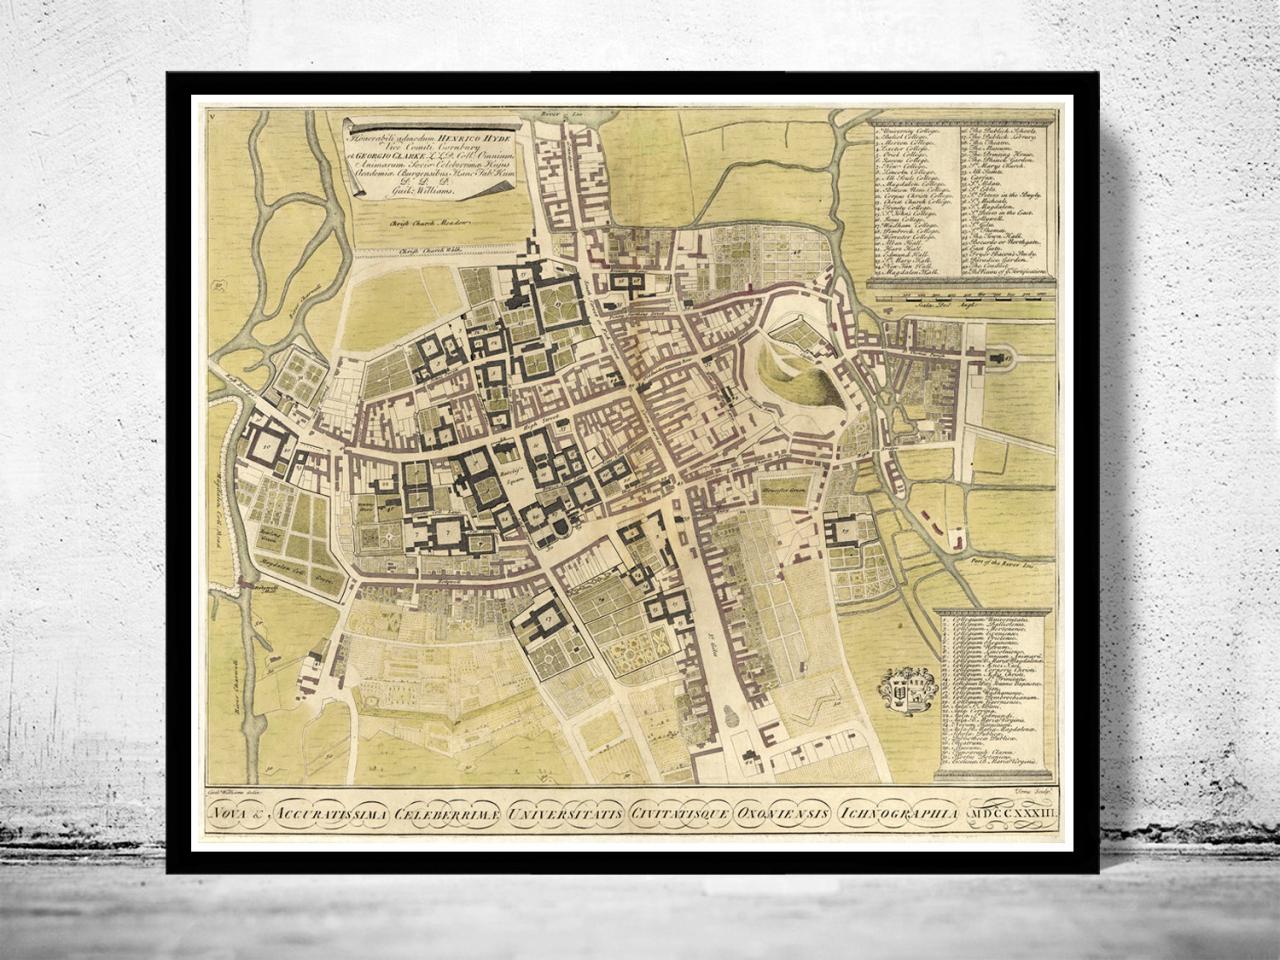 Old Map of Oxford with legends 1733, England United Kingdom